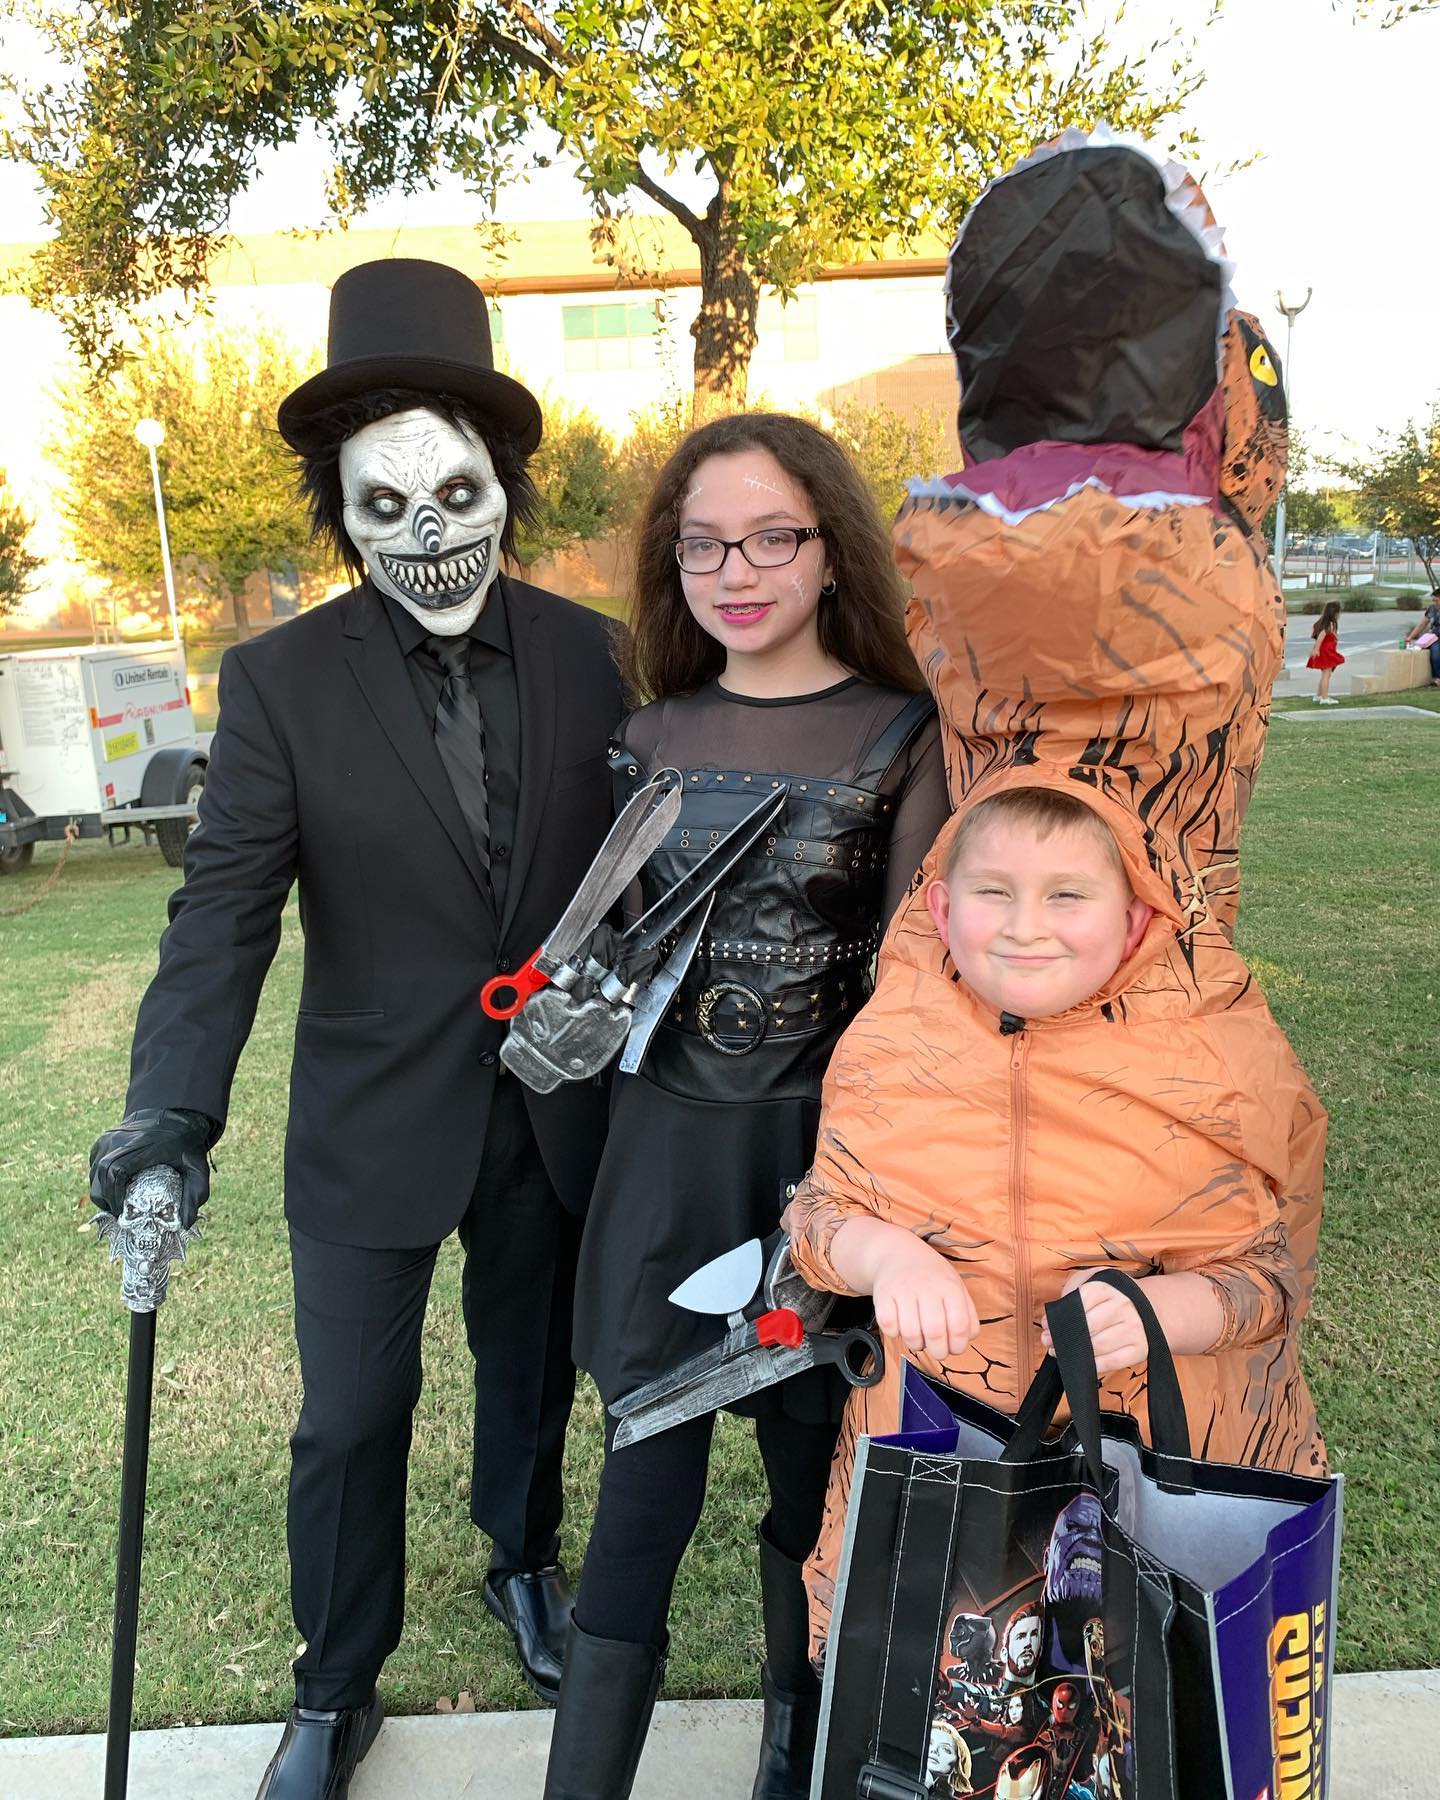 Three individuals in halloween costumes: a masked person with a suit, a young female with scissor hands, a young boy with an inflatable tyrannosaurus rex costume